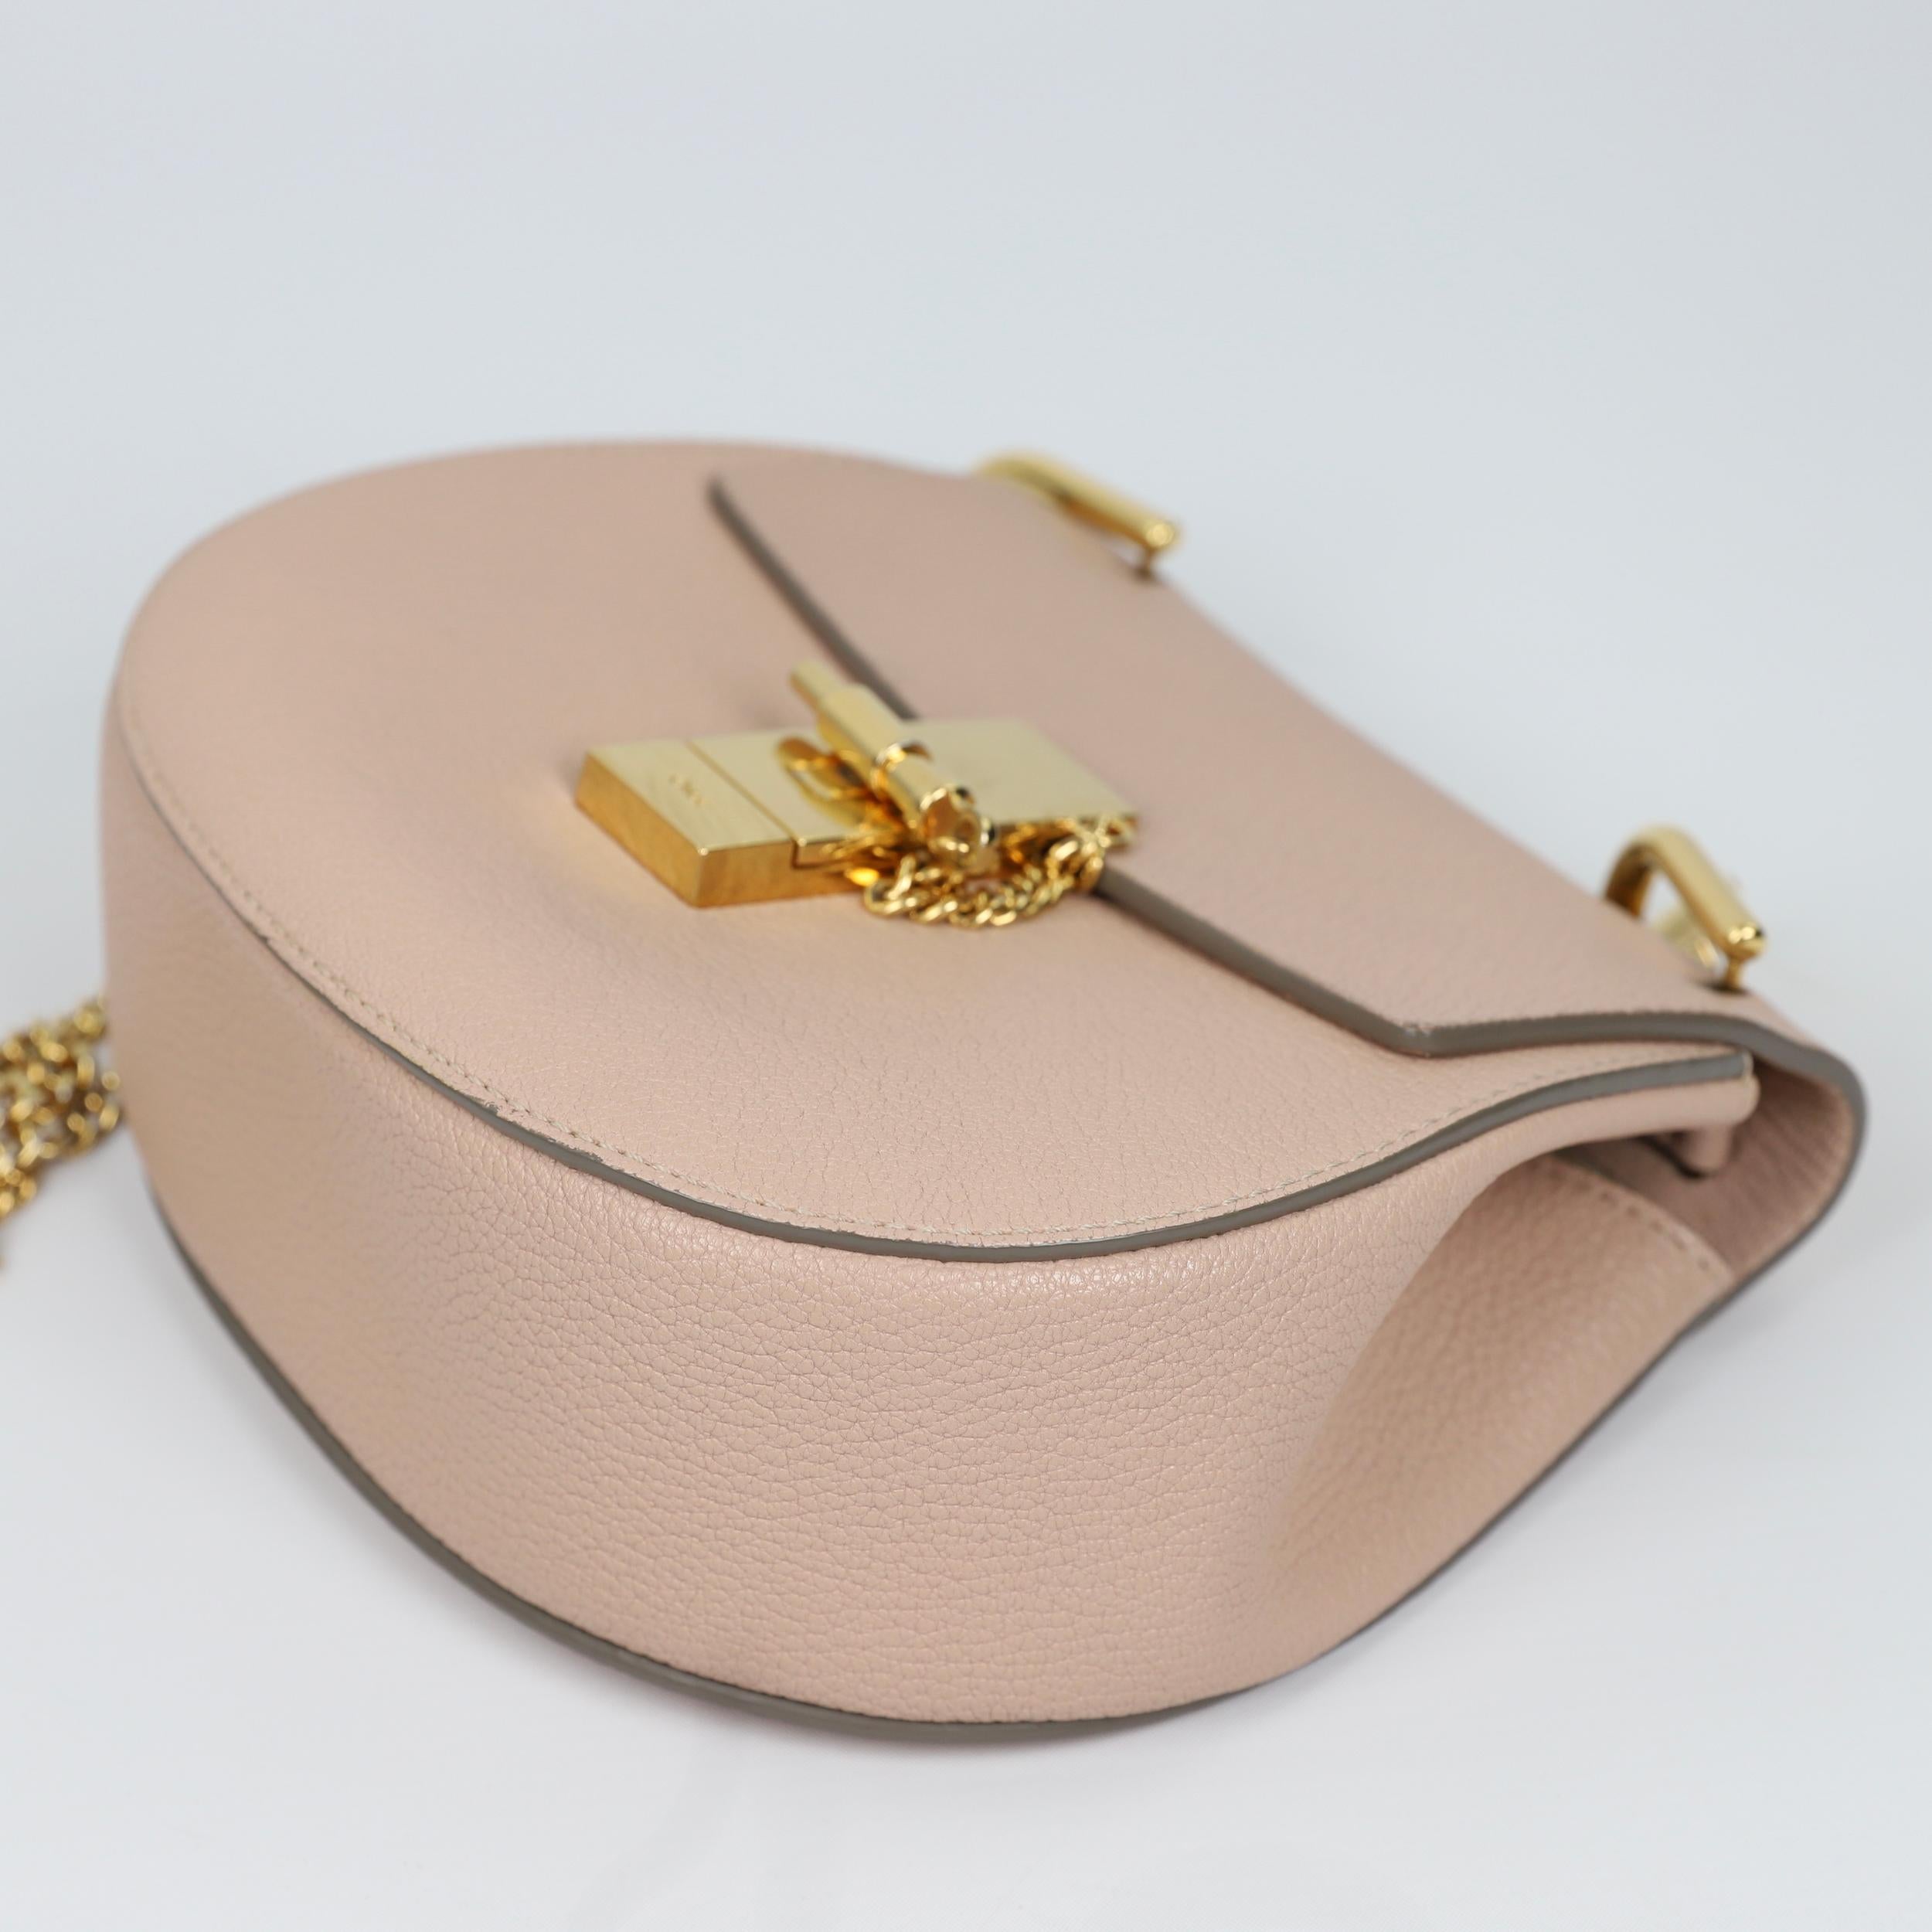 An update to the classic saddle bag, this Chloe Drew bag exudes femininity and draws on its heritage to create a bag with all the bells and whistles we love. This chic bag is crafted from grained leather with a flap closure and unique,